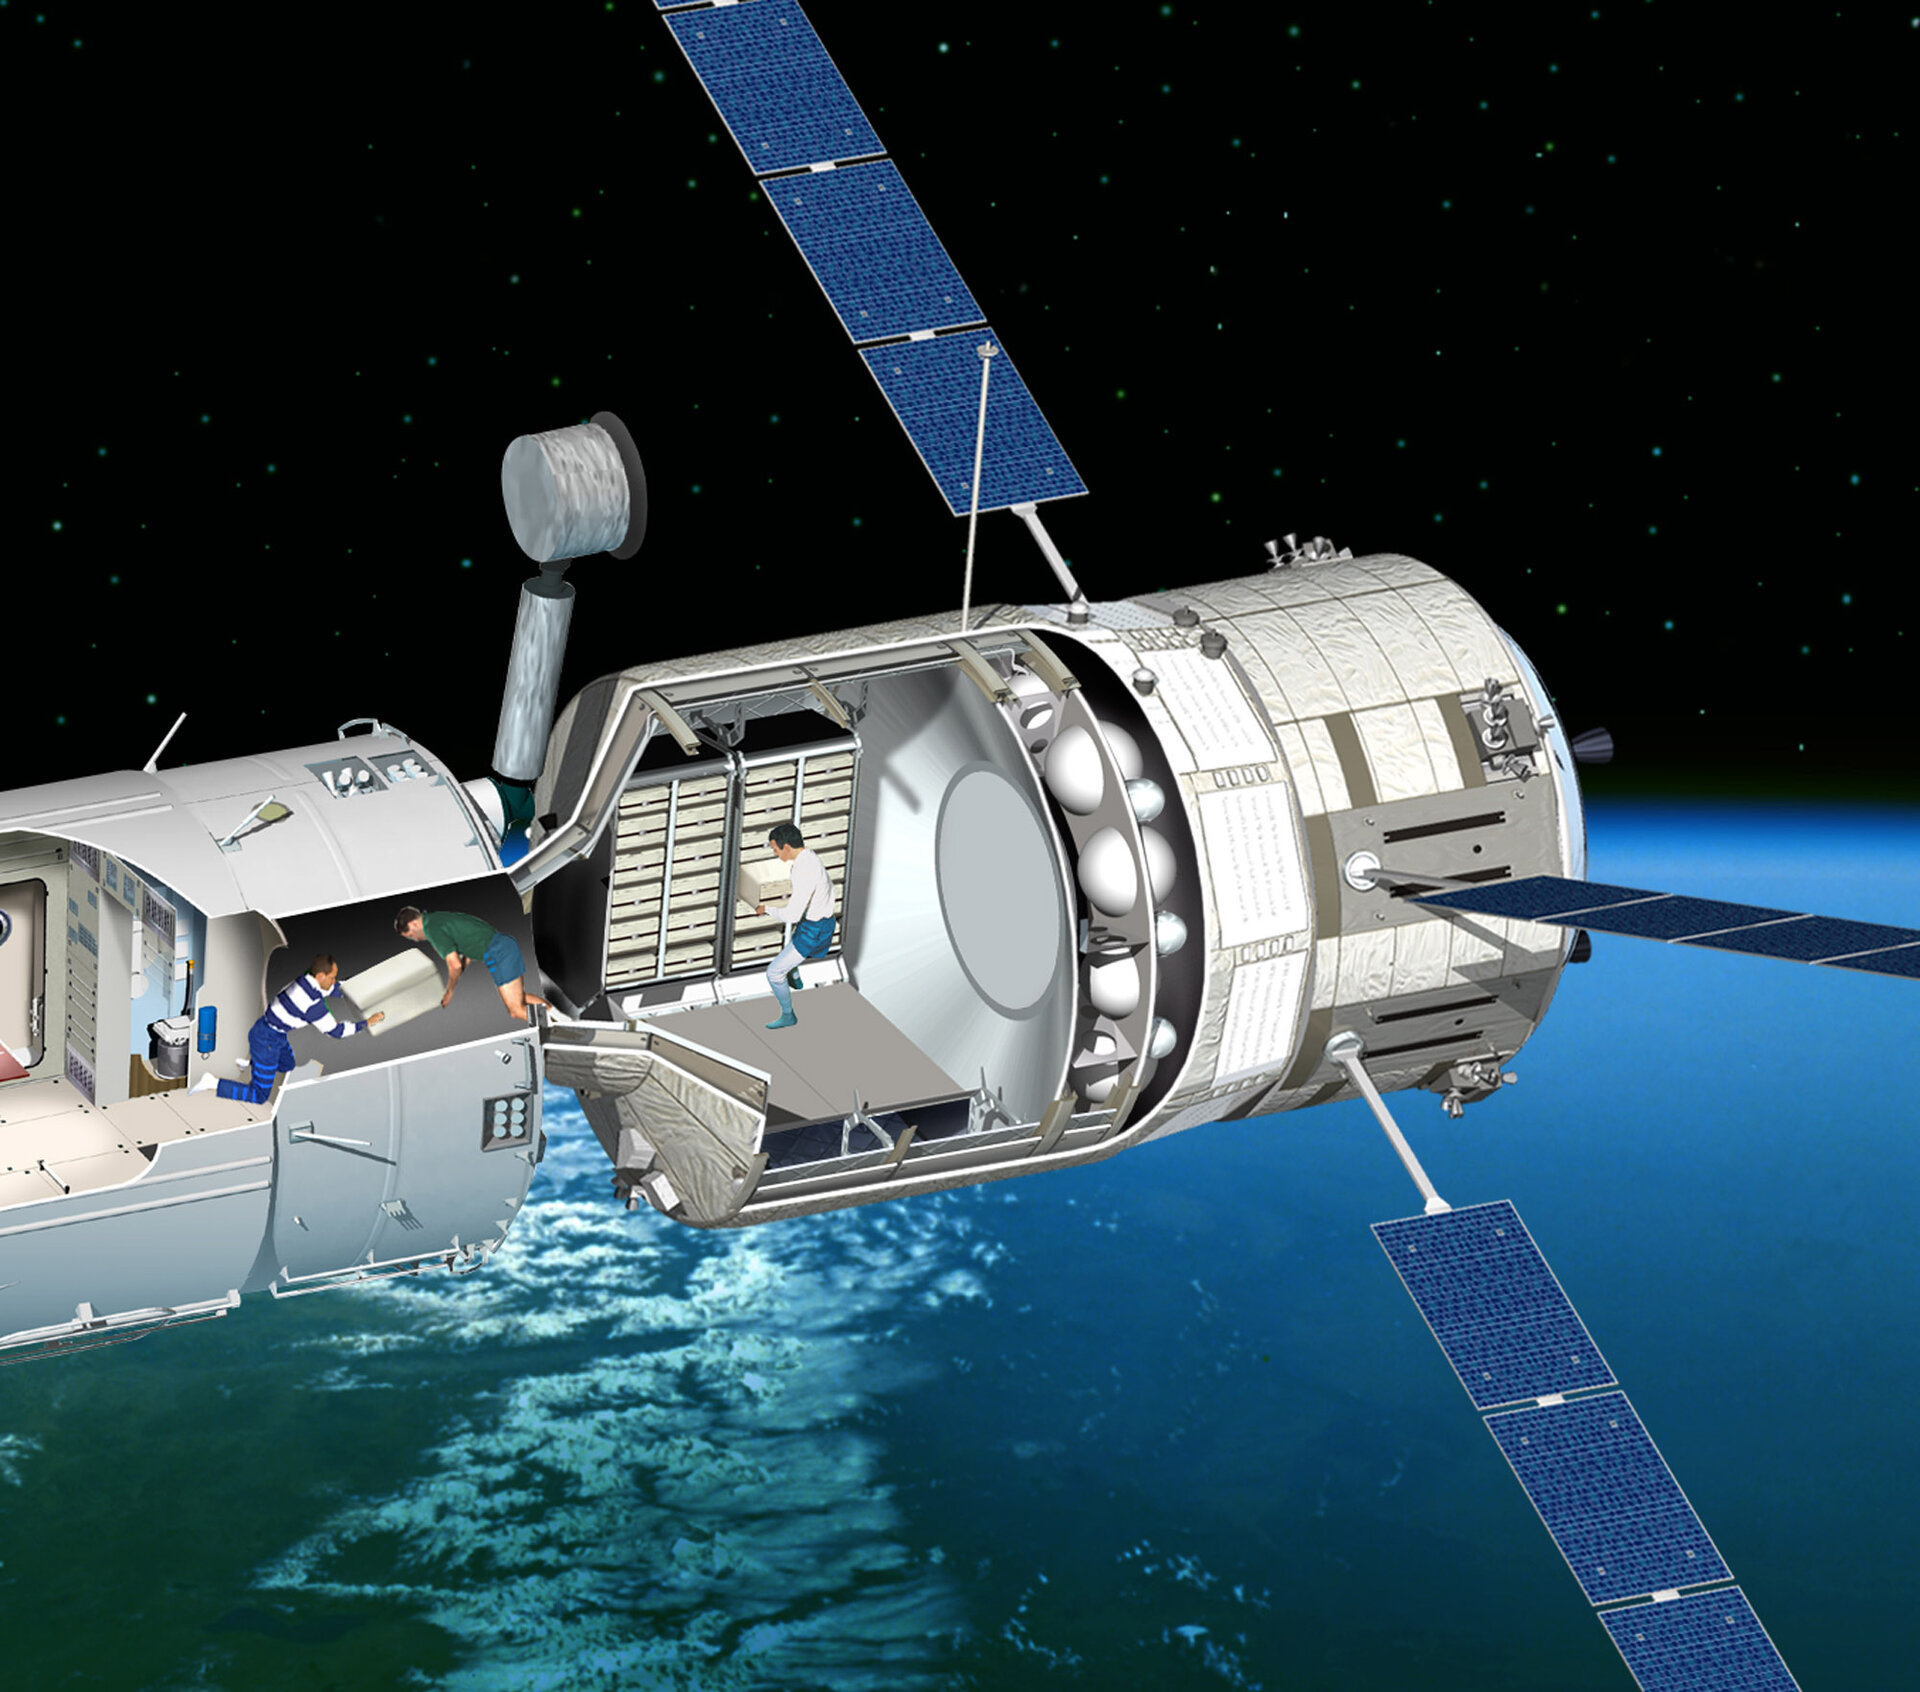 The Automated Transfer Vehicle (ATV) will enable ESA to transport payloads to the International Space Station